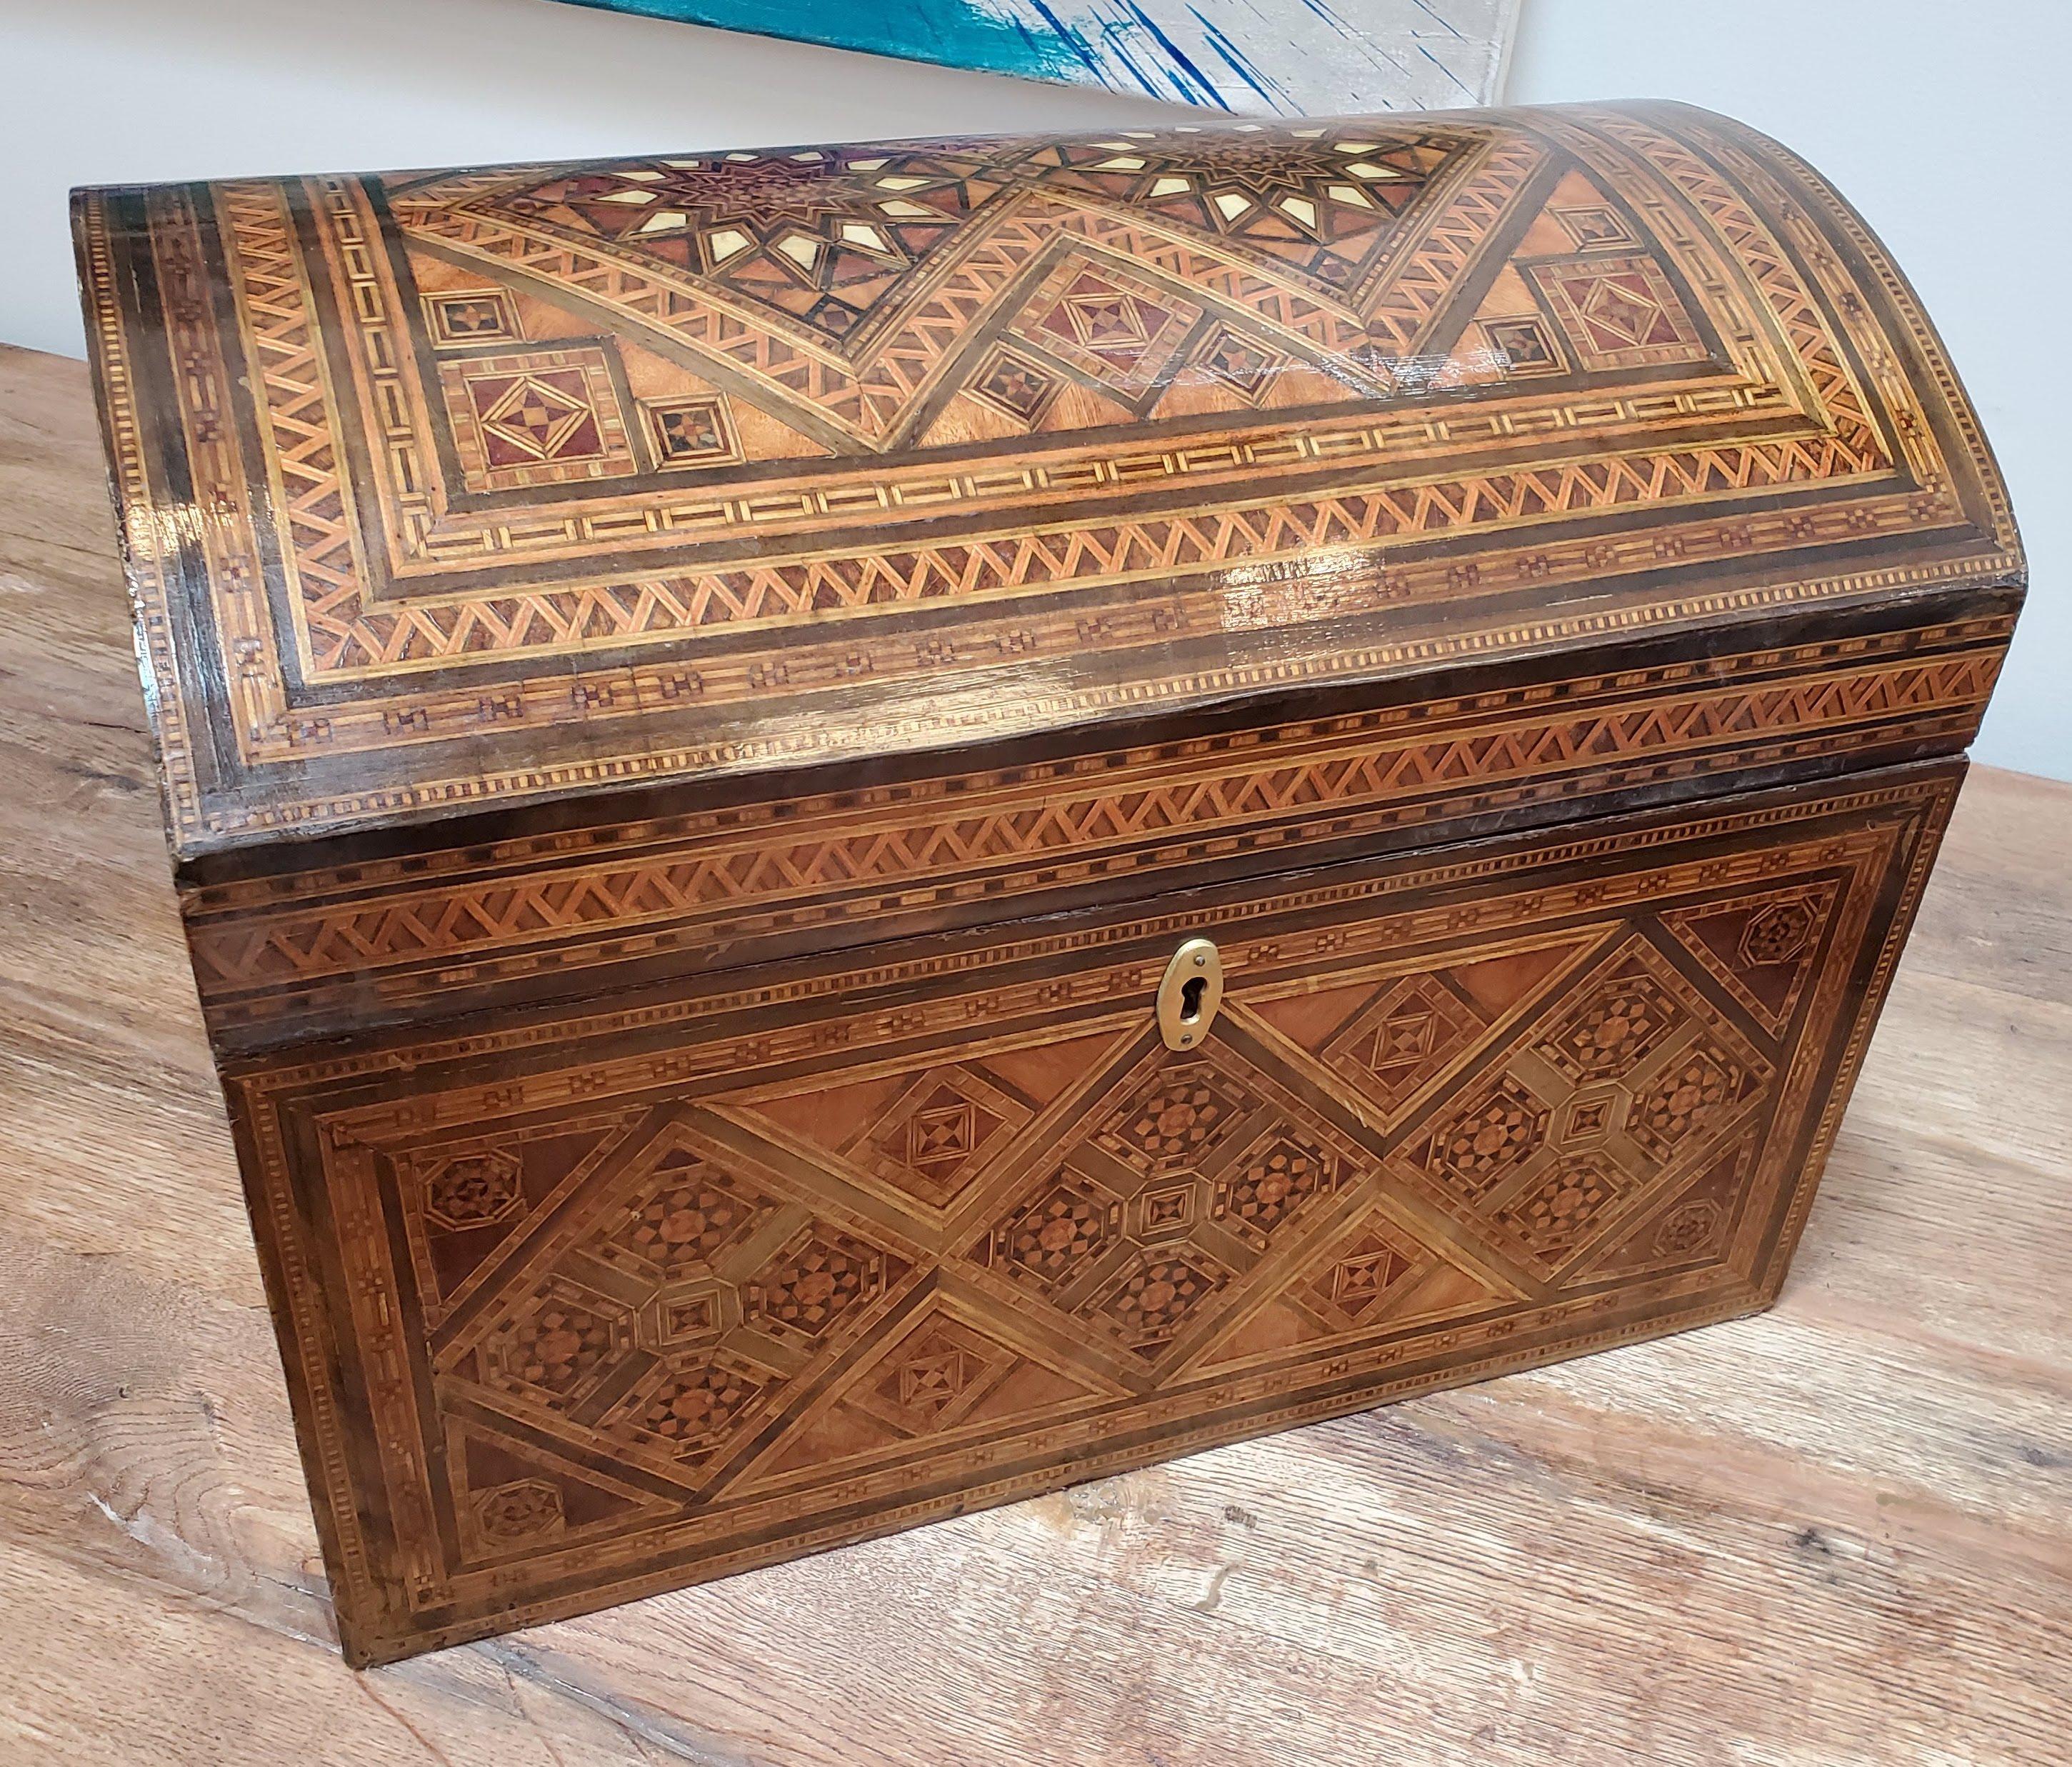 Large 19th century domed top inlaid box. Extraordinary geometric parquetry inlay. Various exotic woods and mother of pearl with velvet fitted interior. Damascus, circa 1890. 
Measures: 14” H, 19” W, 13” D.